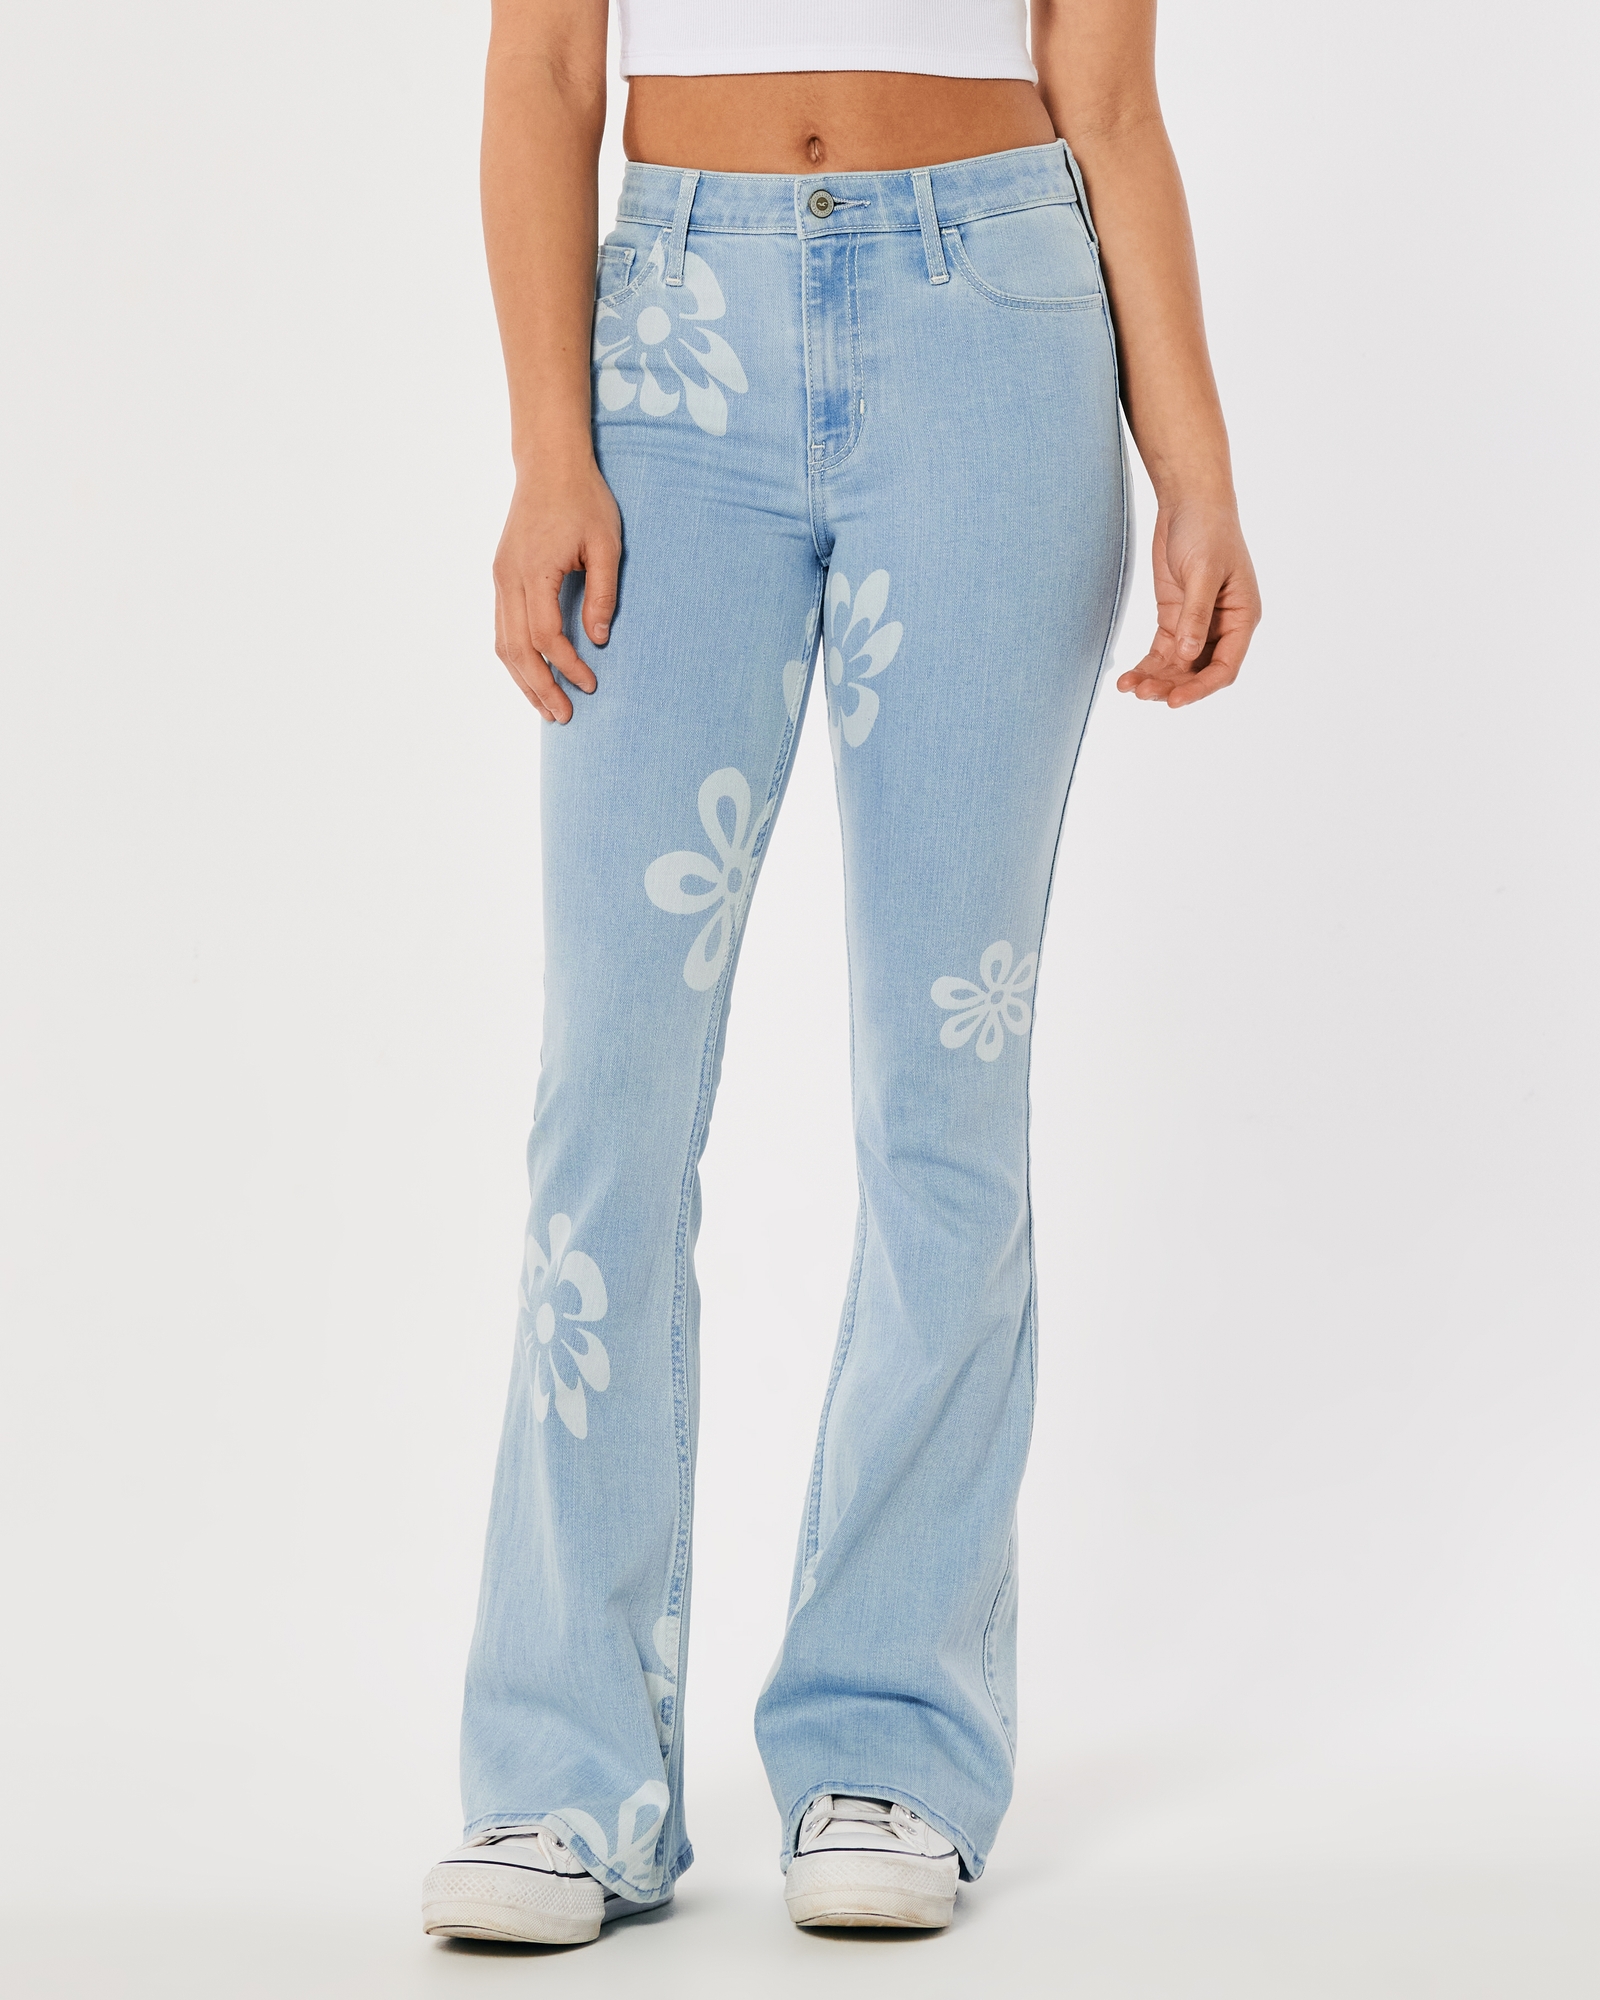 Flair Bright Floral Embroidered Jeans